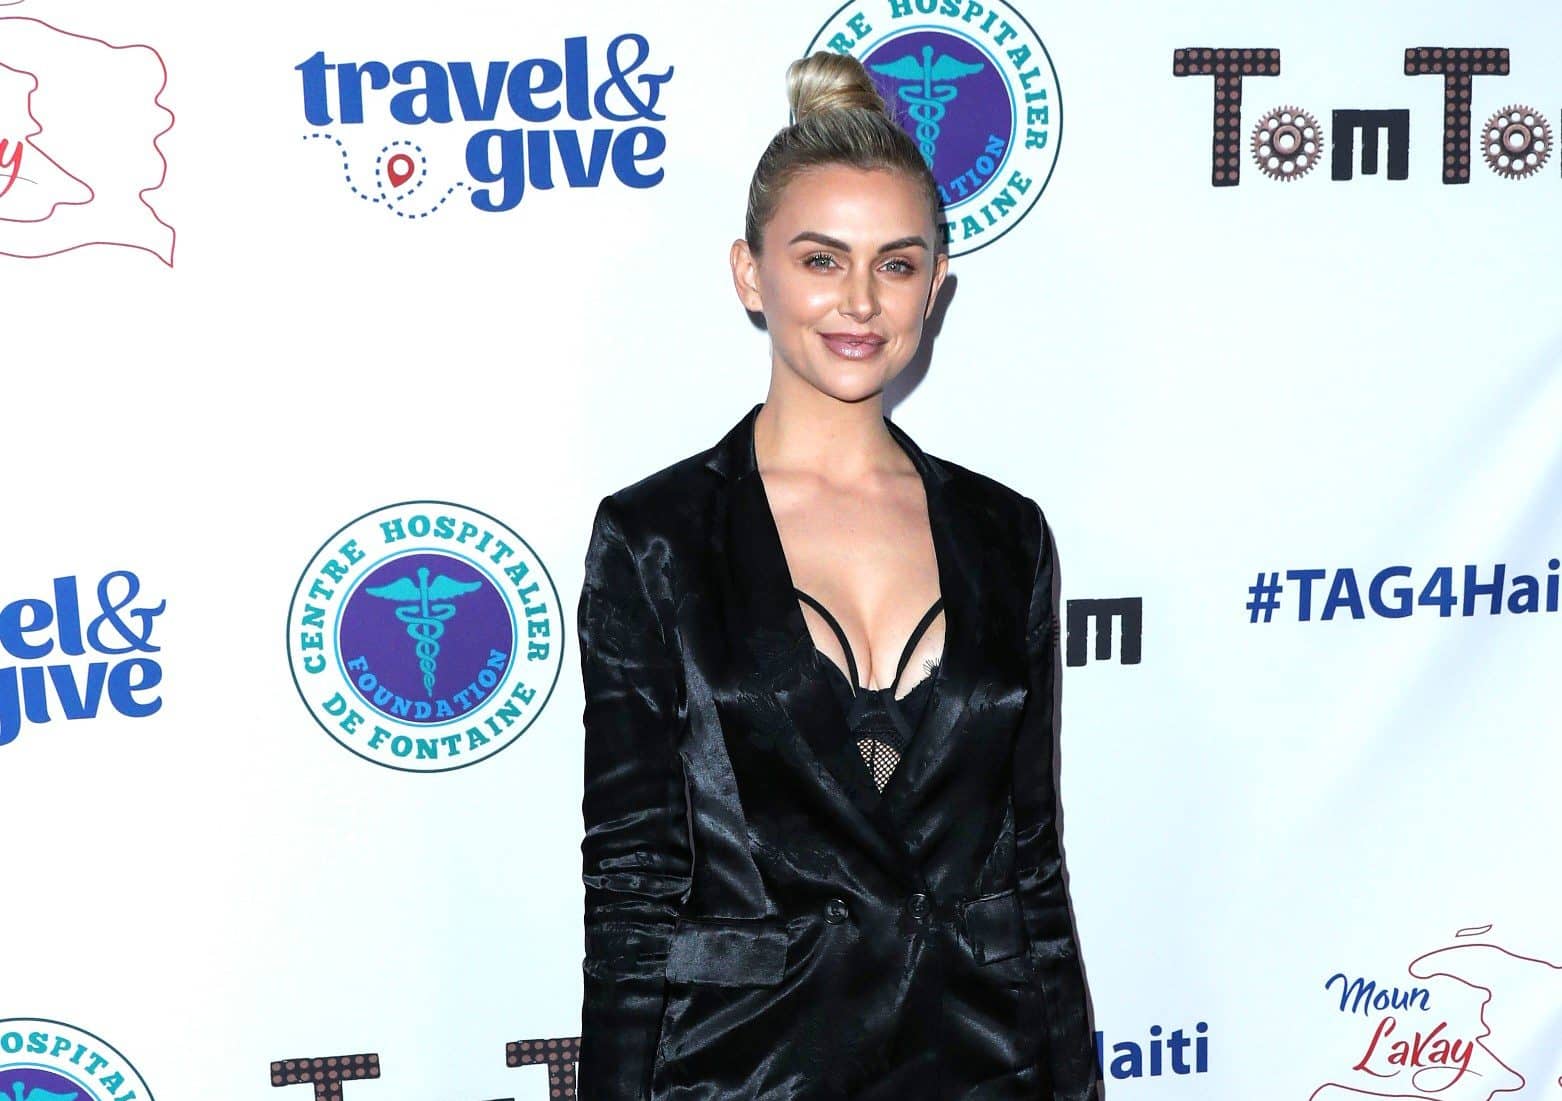 PHOTO: Vanderpump Rules' Lala Kent Debuts "Pinned Back" Ear After Surgery, Says She's "So Happy" With Post-Op Results